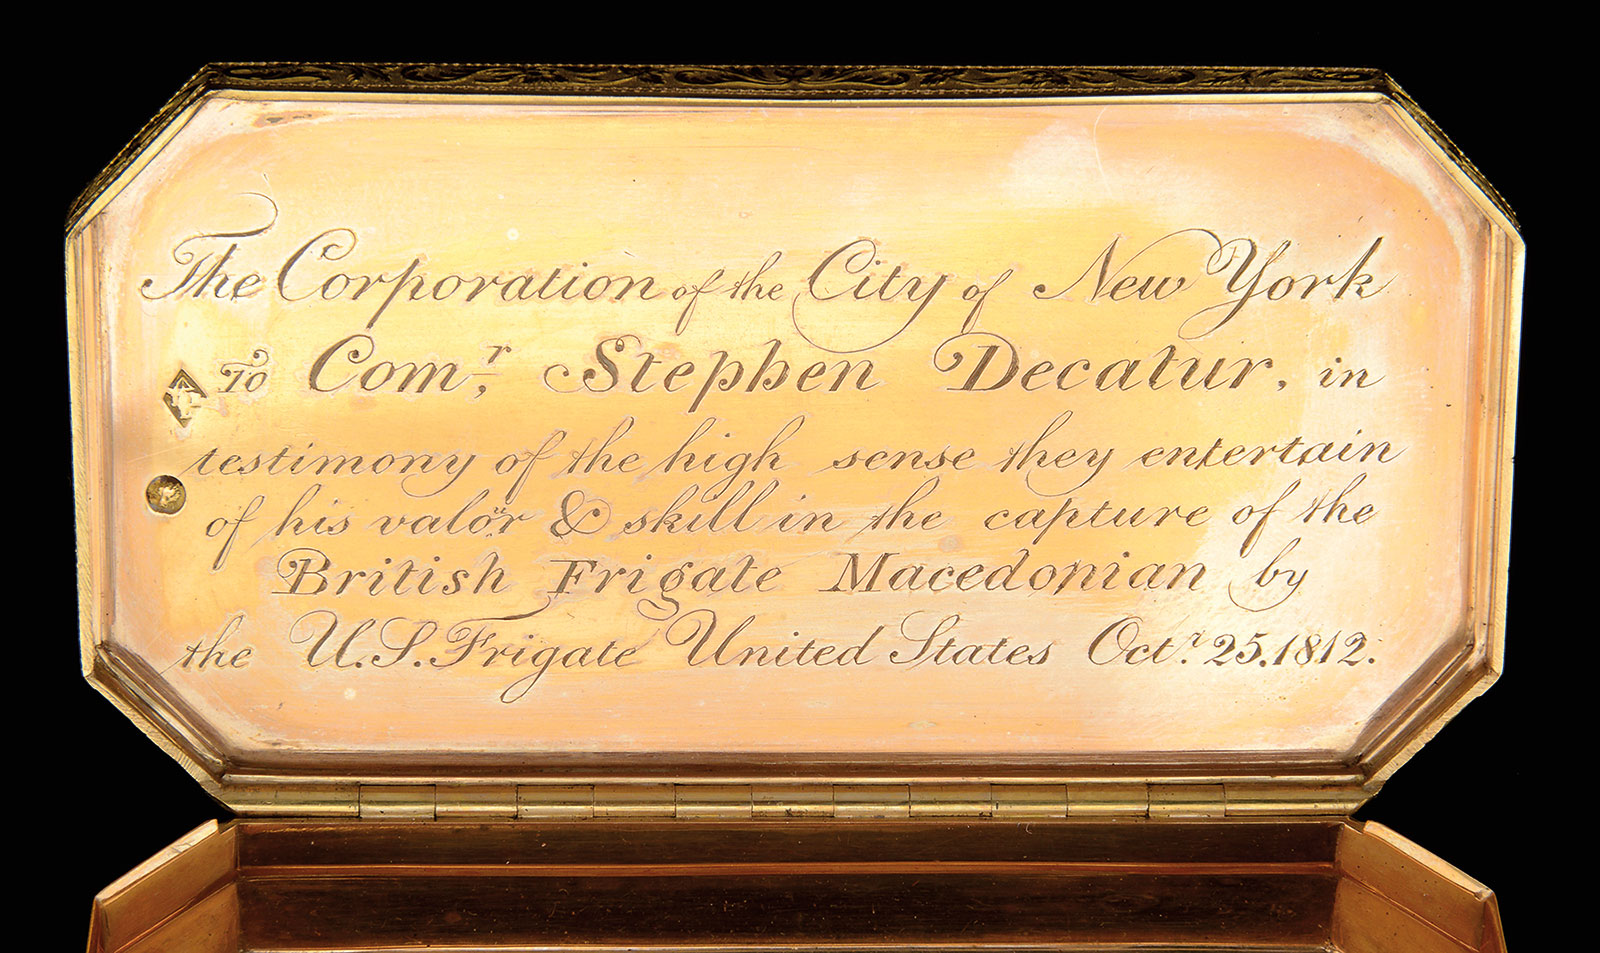 Rare Gold Freedom Box, Commodore Stephen Decatur from the City of New York, 1812, estimated at $125,000-175,000.